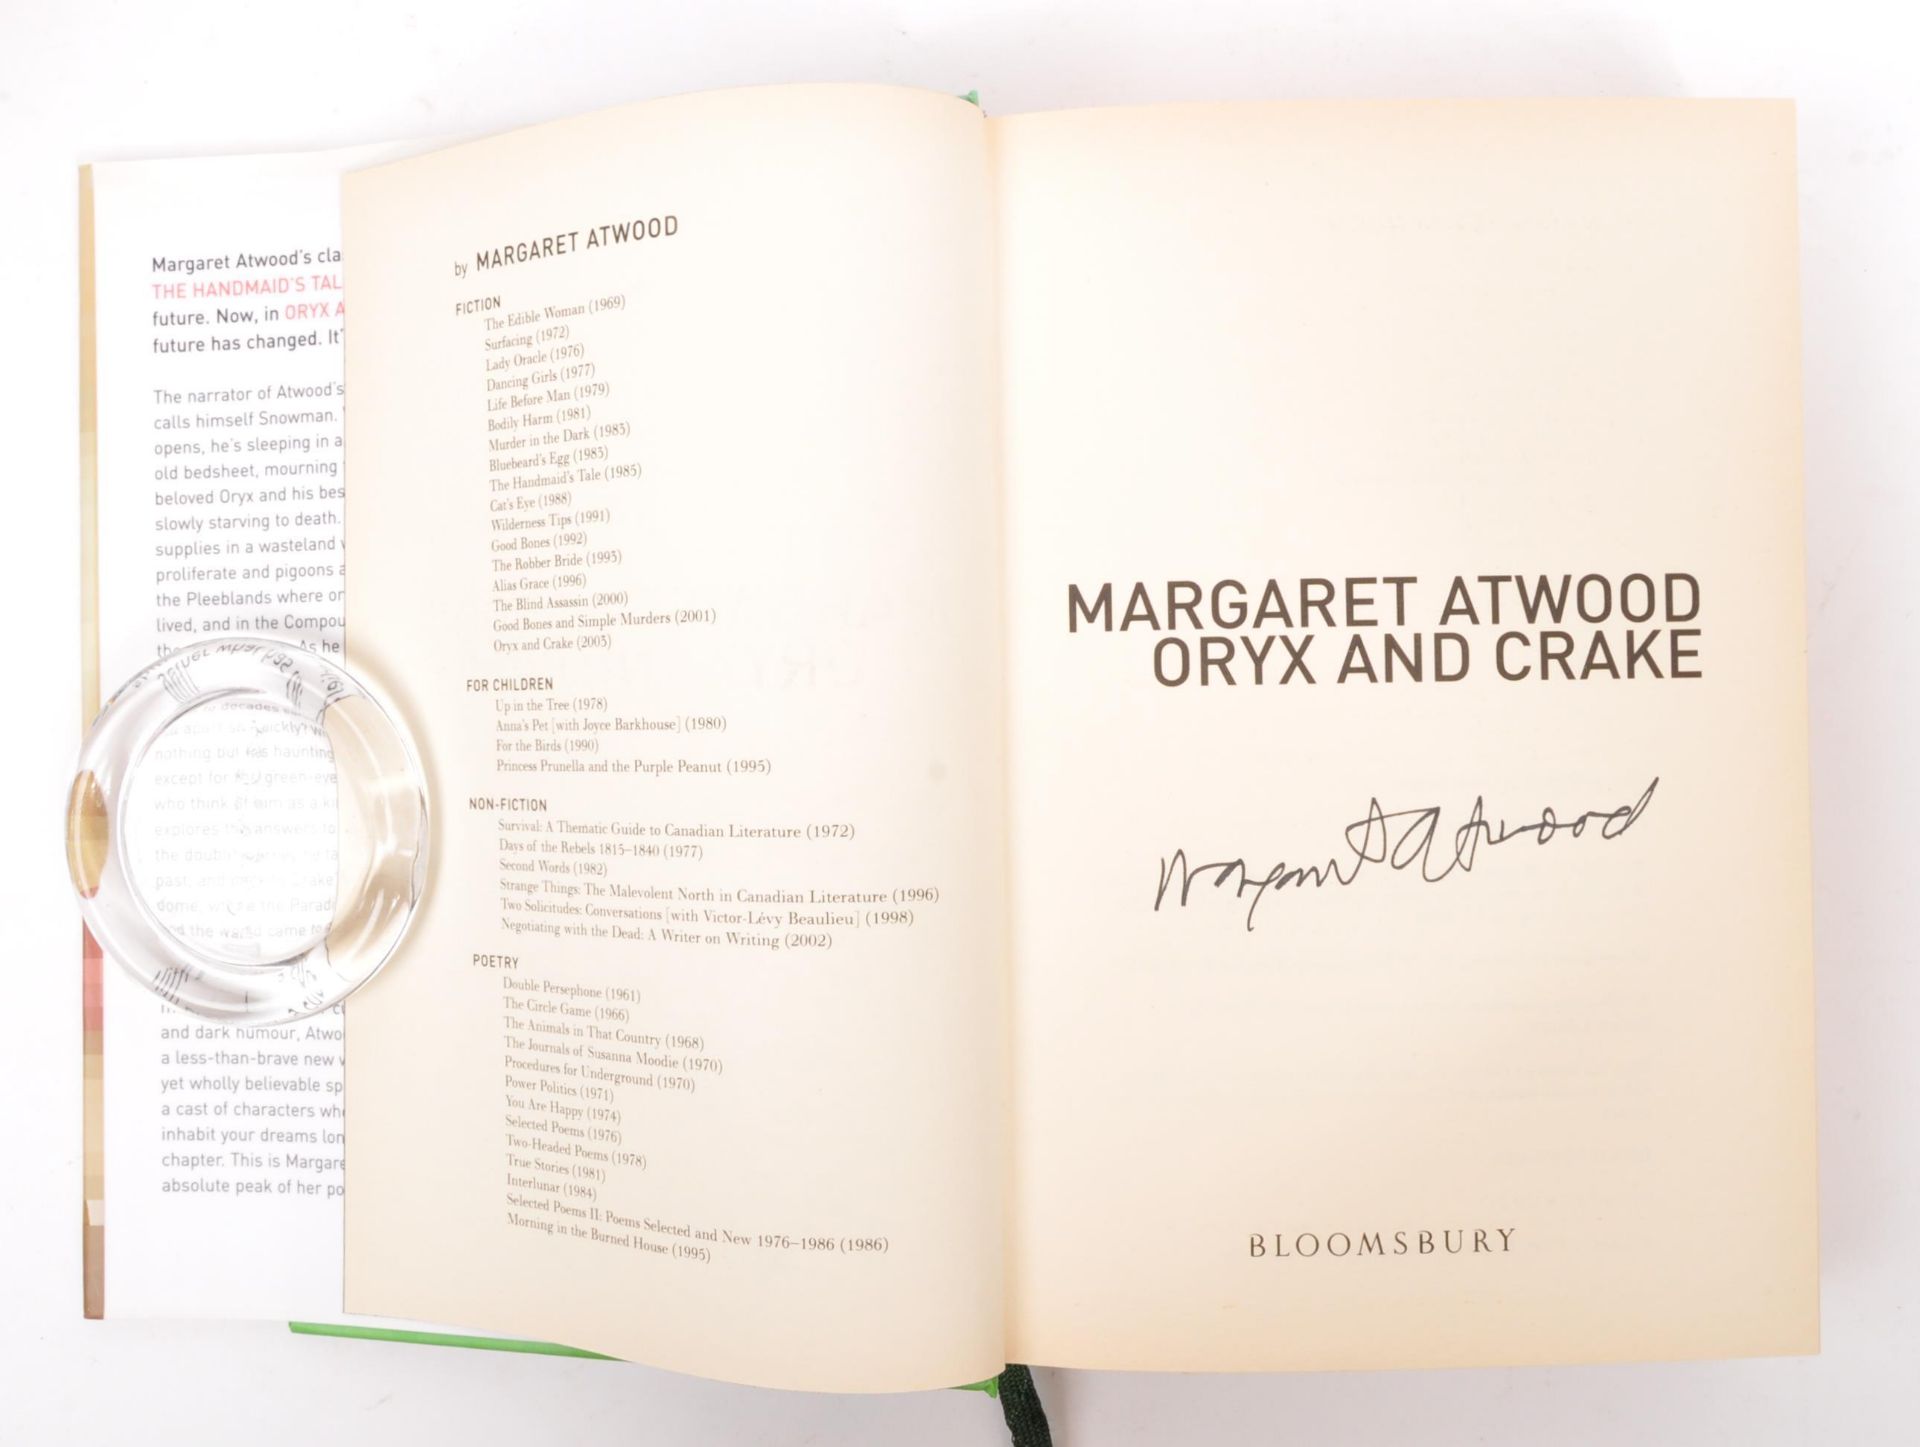 MARGARET ATWOOD - COLLECTION OF SIGNED FIRST EDITION NOVELS - Image 2 of 10